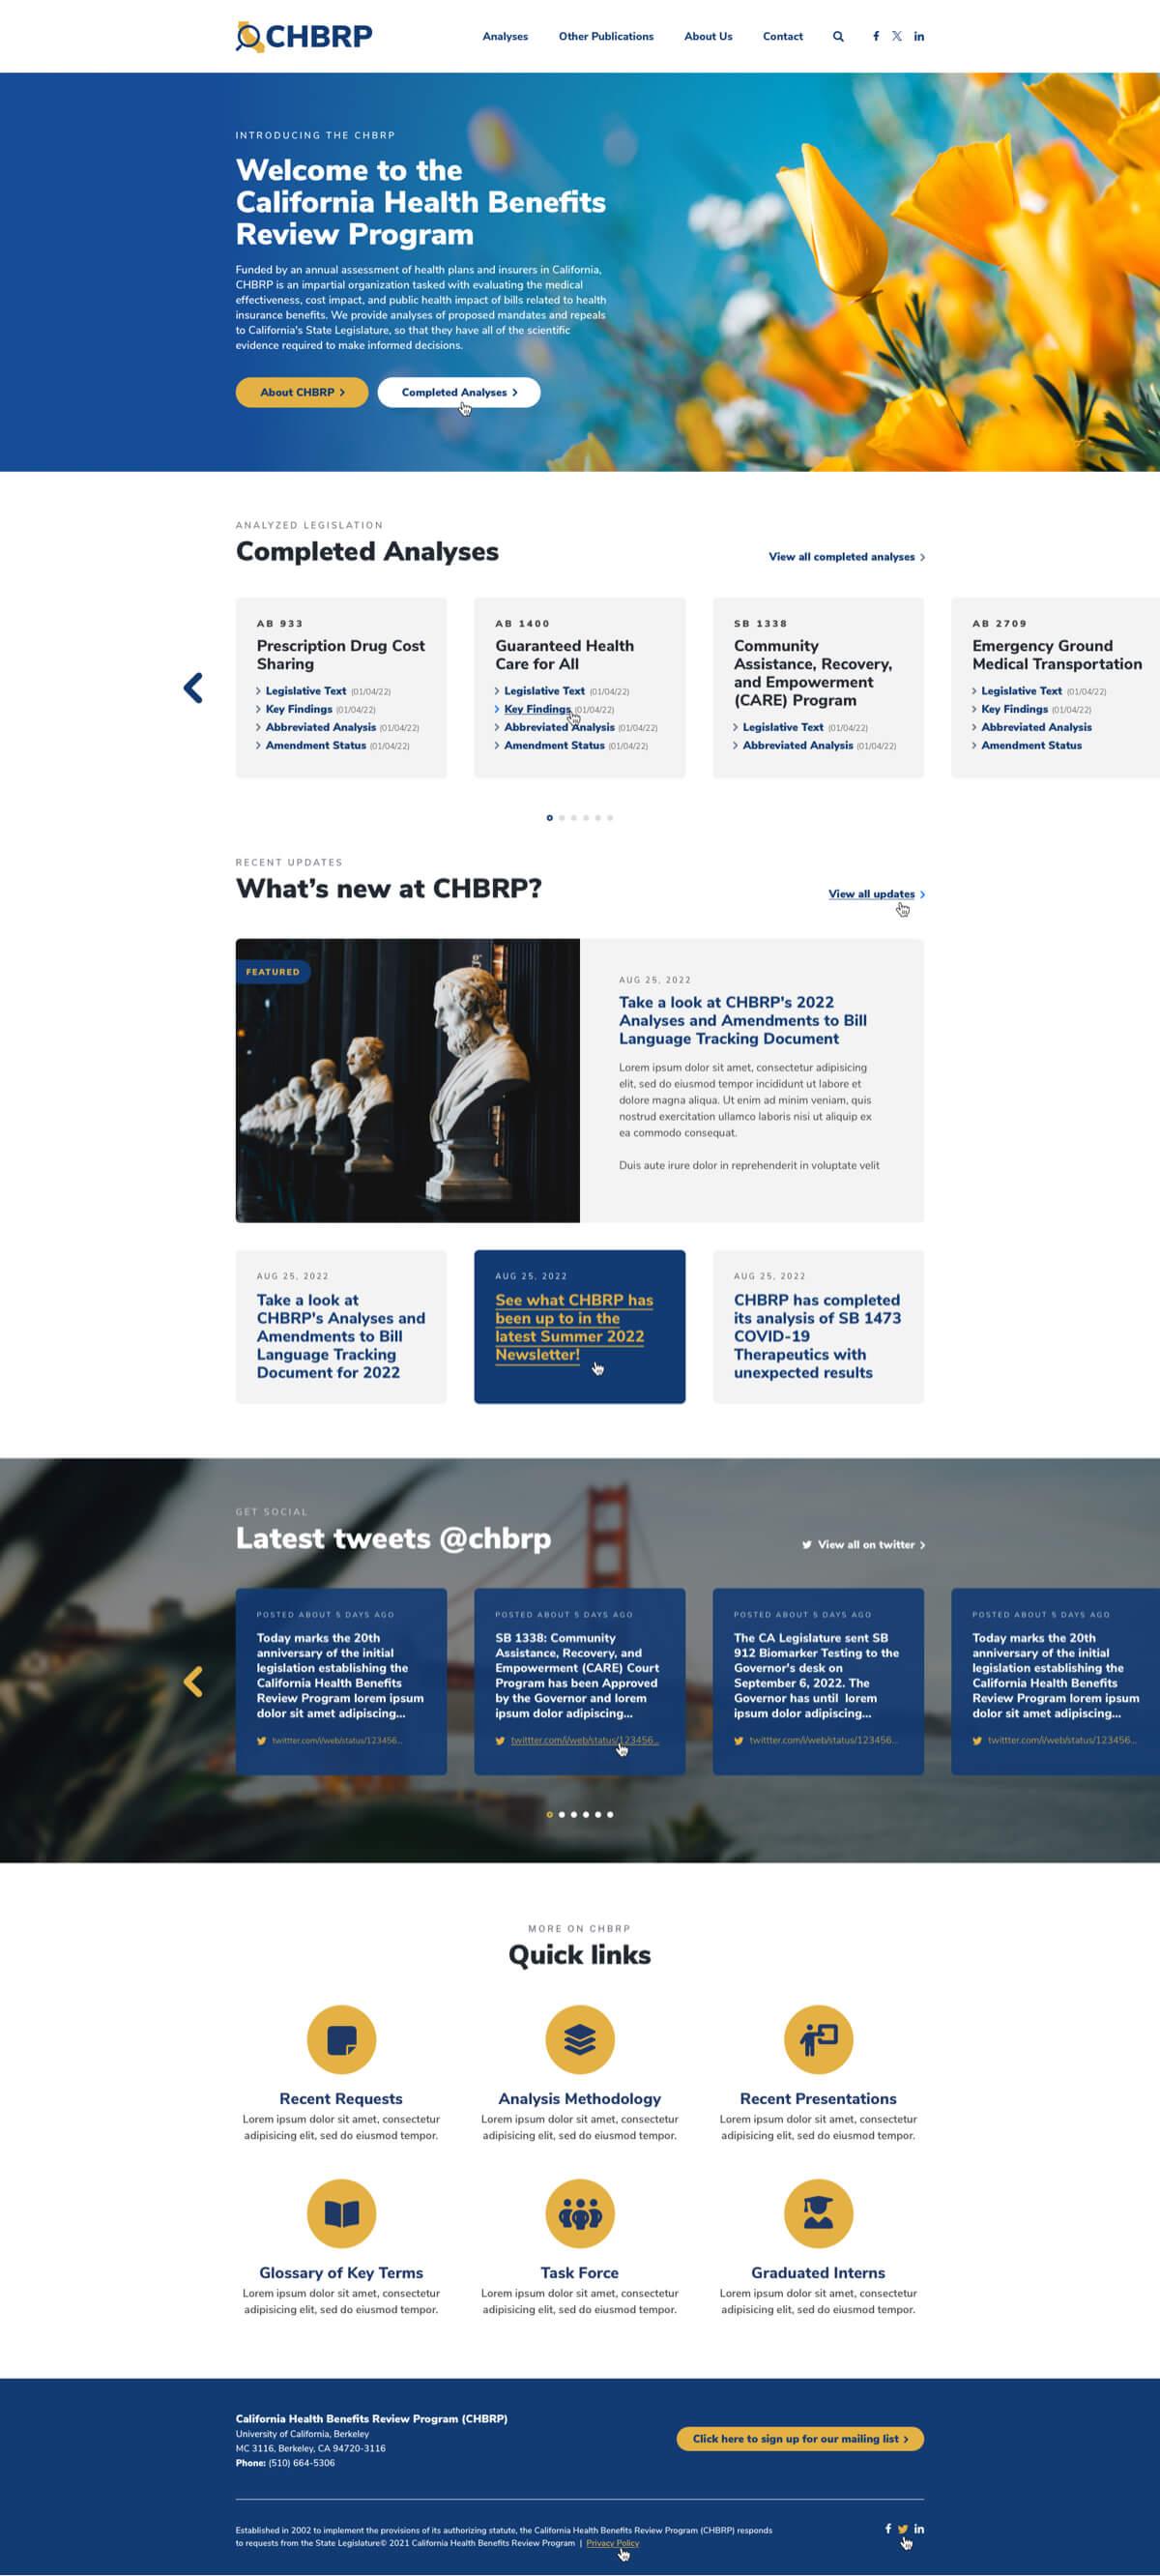 Design of the CHBRP homepage